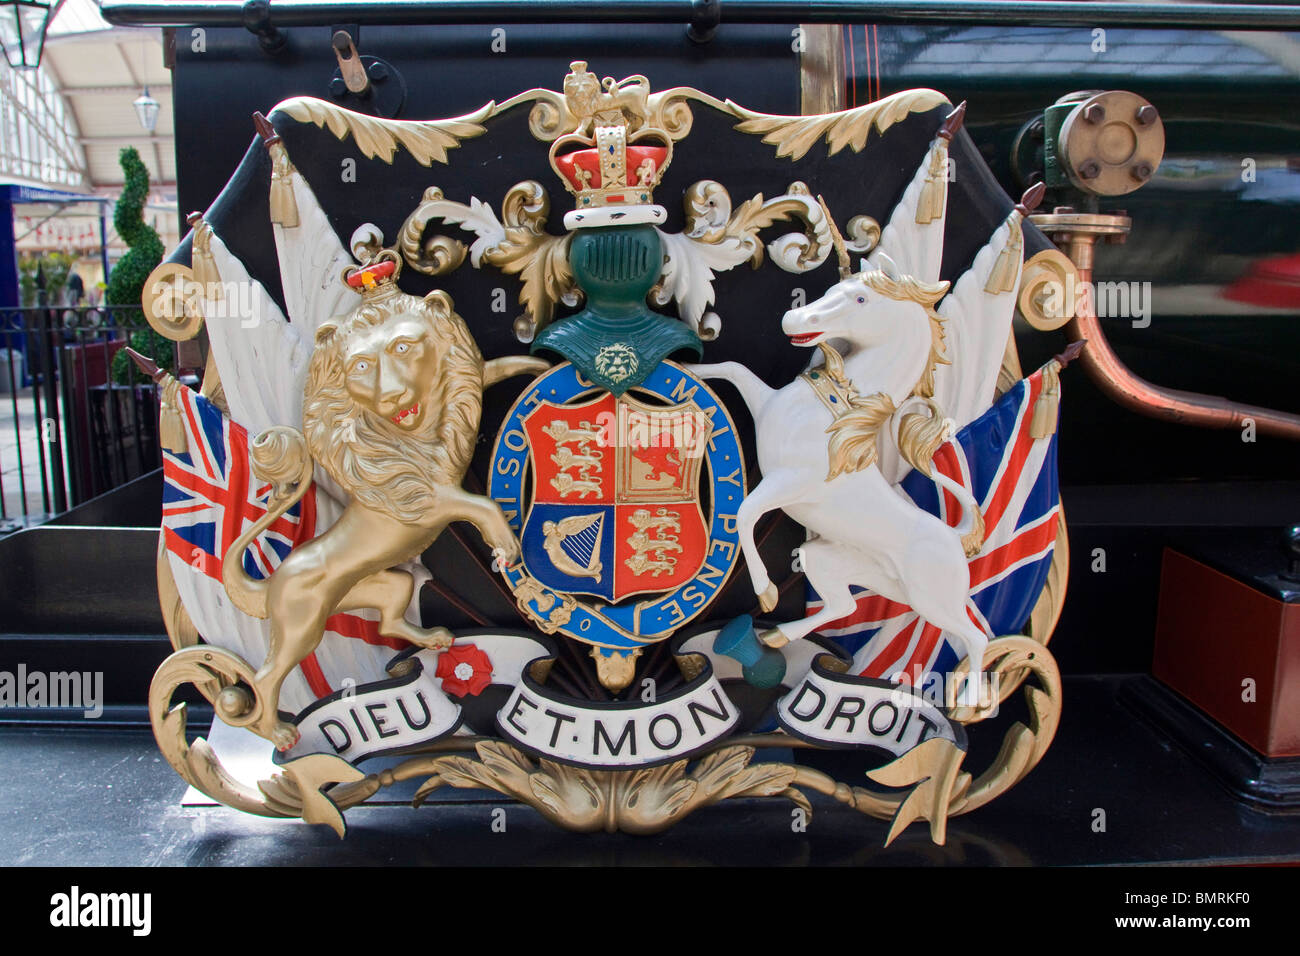 Coat Of Arms Of The United Kingdom And Shield Dieu Et Mon Droit British Monarch Motto Horizontal Windsor Stock Photo Alamy